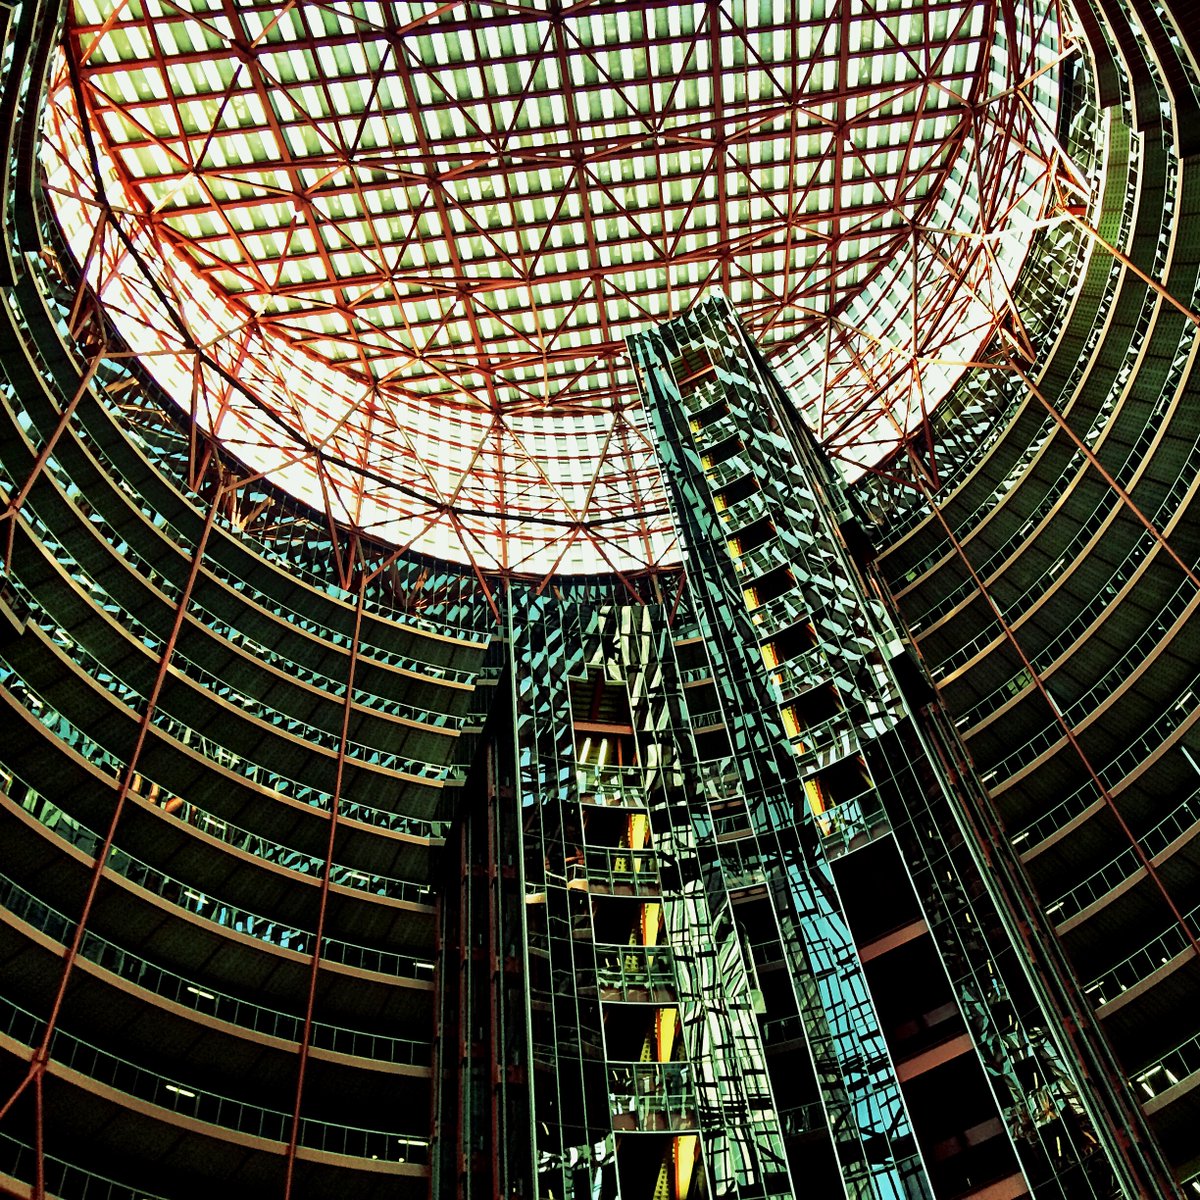 Helmut Jahn's Thompson Center has become a tragic crucible in the fight between the techno-dystopian surveillance state's drive toward neoliberal homogeneity and what's left of democratic urbanism. Very happy to make my @ArchReview debut.  architectural-review.com/essays/revisit…